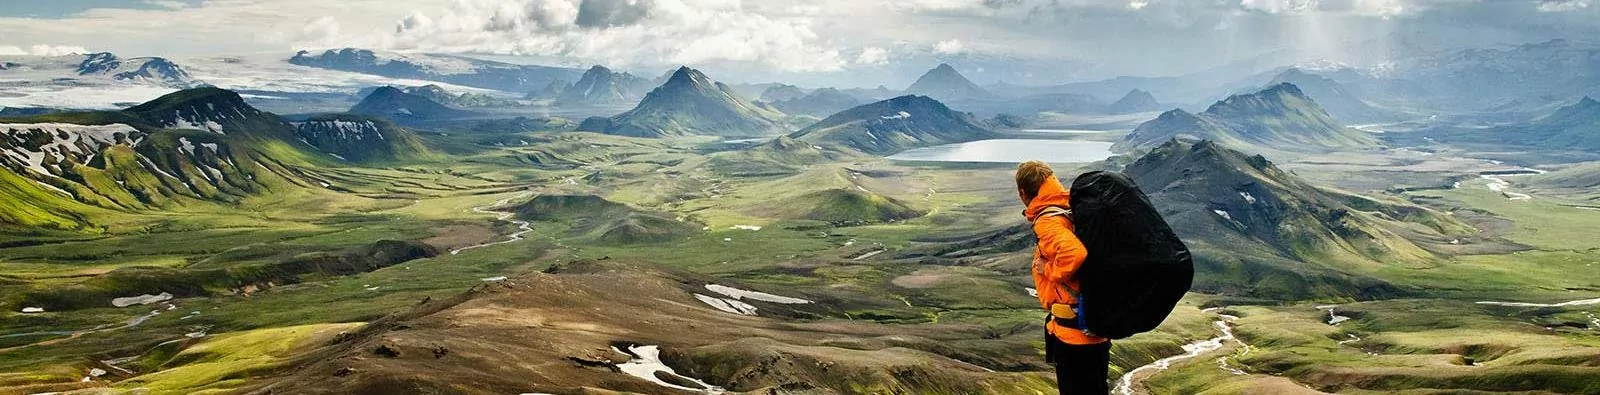 Hiker looking out at the Laugavegur Trail in Iceland